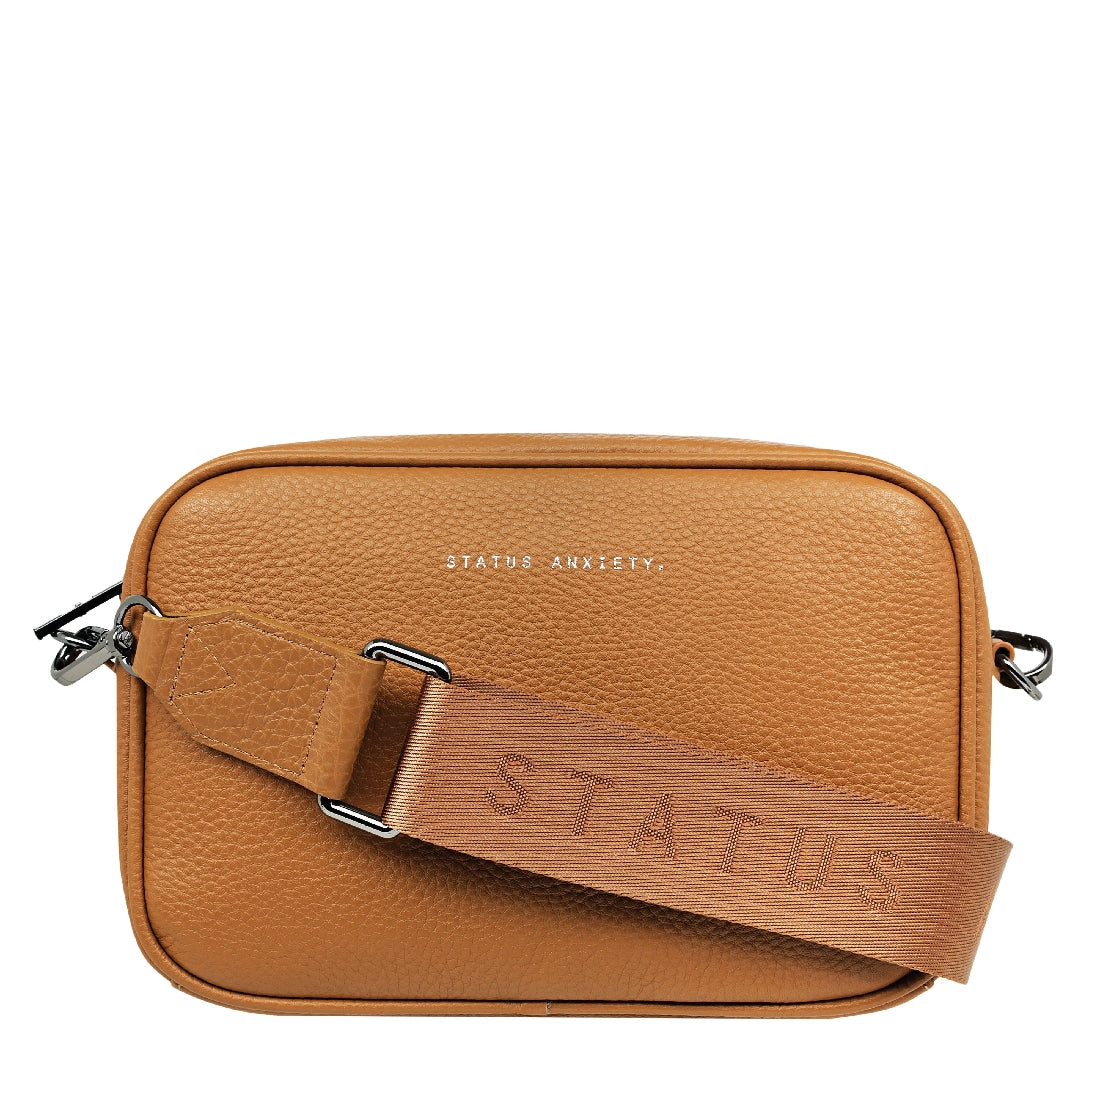 Status Anxiety Plunder with Webbed Strap - Little Extras Lifestyle Boutique